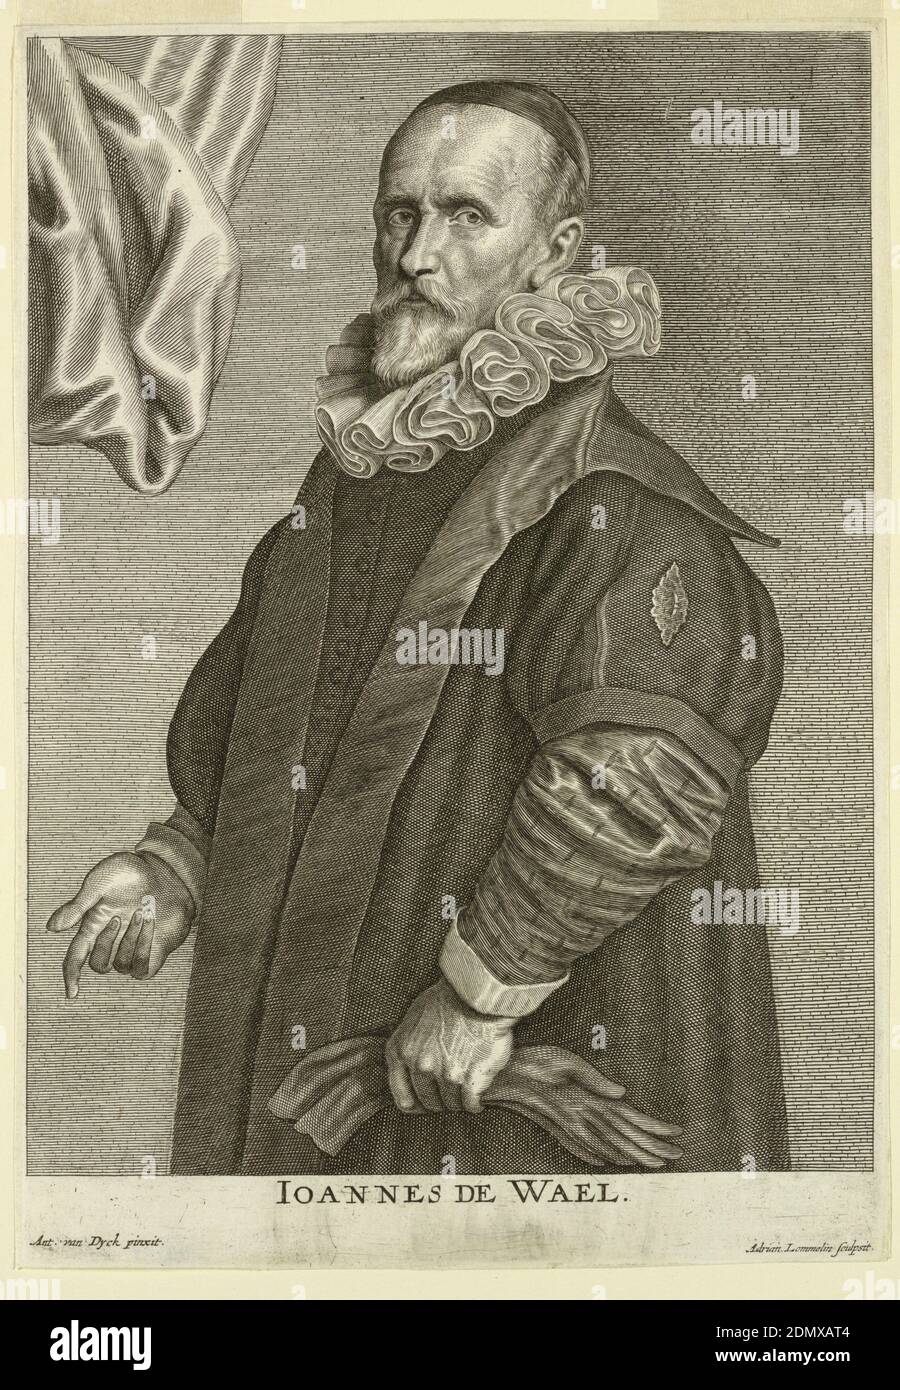 Portrait of Jan de Wael, from the Icones Principum Virorum, Adrien Lommelin, Anthony van Dyck, Netherlandish, 1599 – 1641, Etching on paper in black ink, Knee-length portrait of a standing old man in three-quarter view turned to left. He wears a skull-cap and a short-sleeved coat over a suit with a white pleated collar. He points to something with his right hand; in his left hand a pair of long gloves., Netherlands, 1660-1670, Print Stock Photo